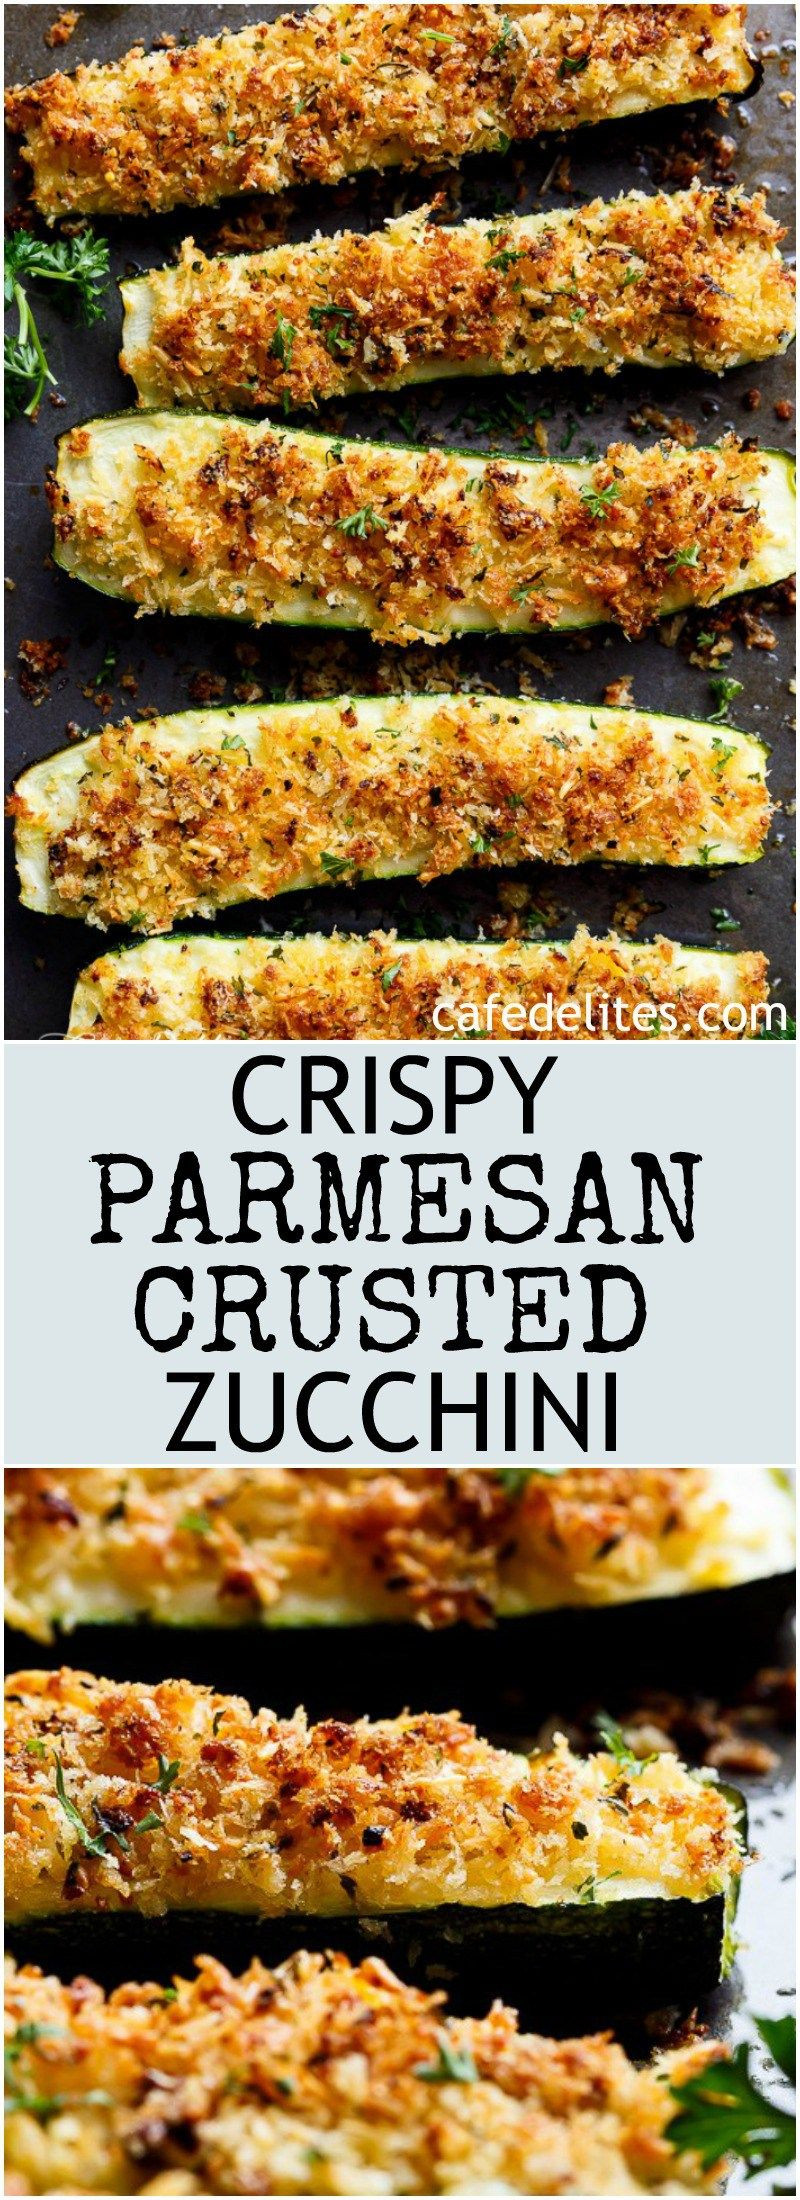 Parmesan Crusted Zucchini Keto
 Parmesan Crusted Zucchini are easy to make and are one of